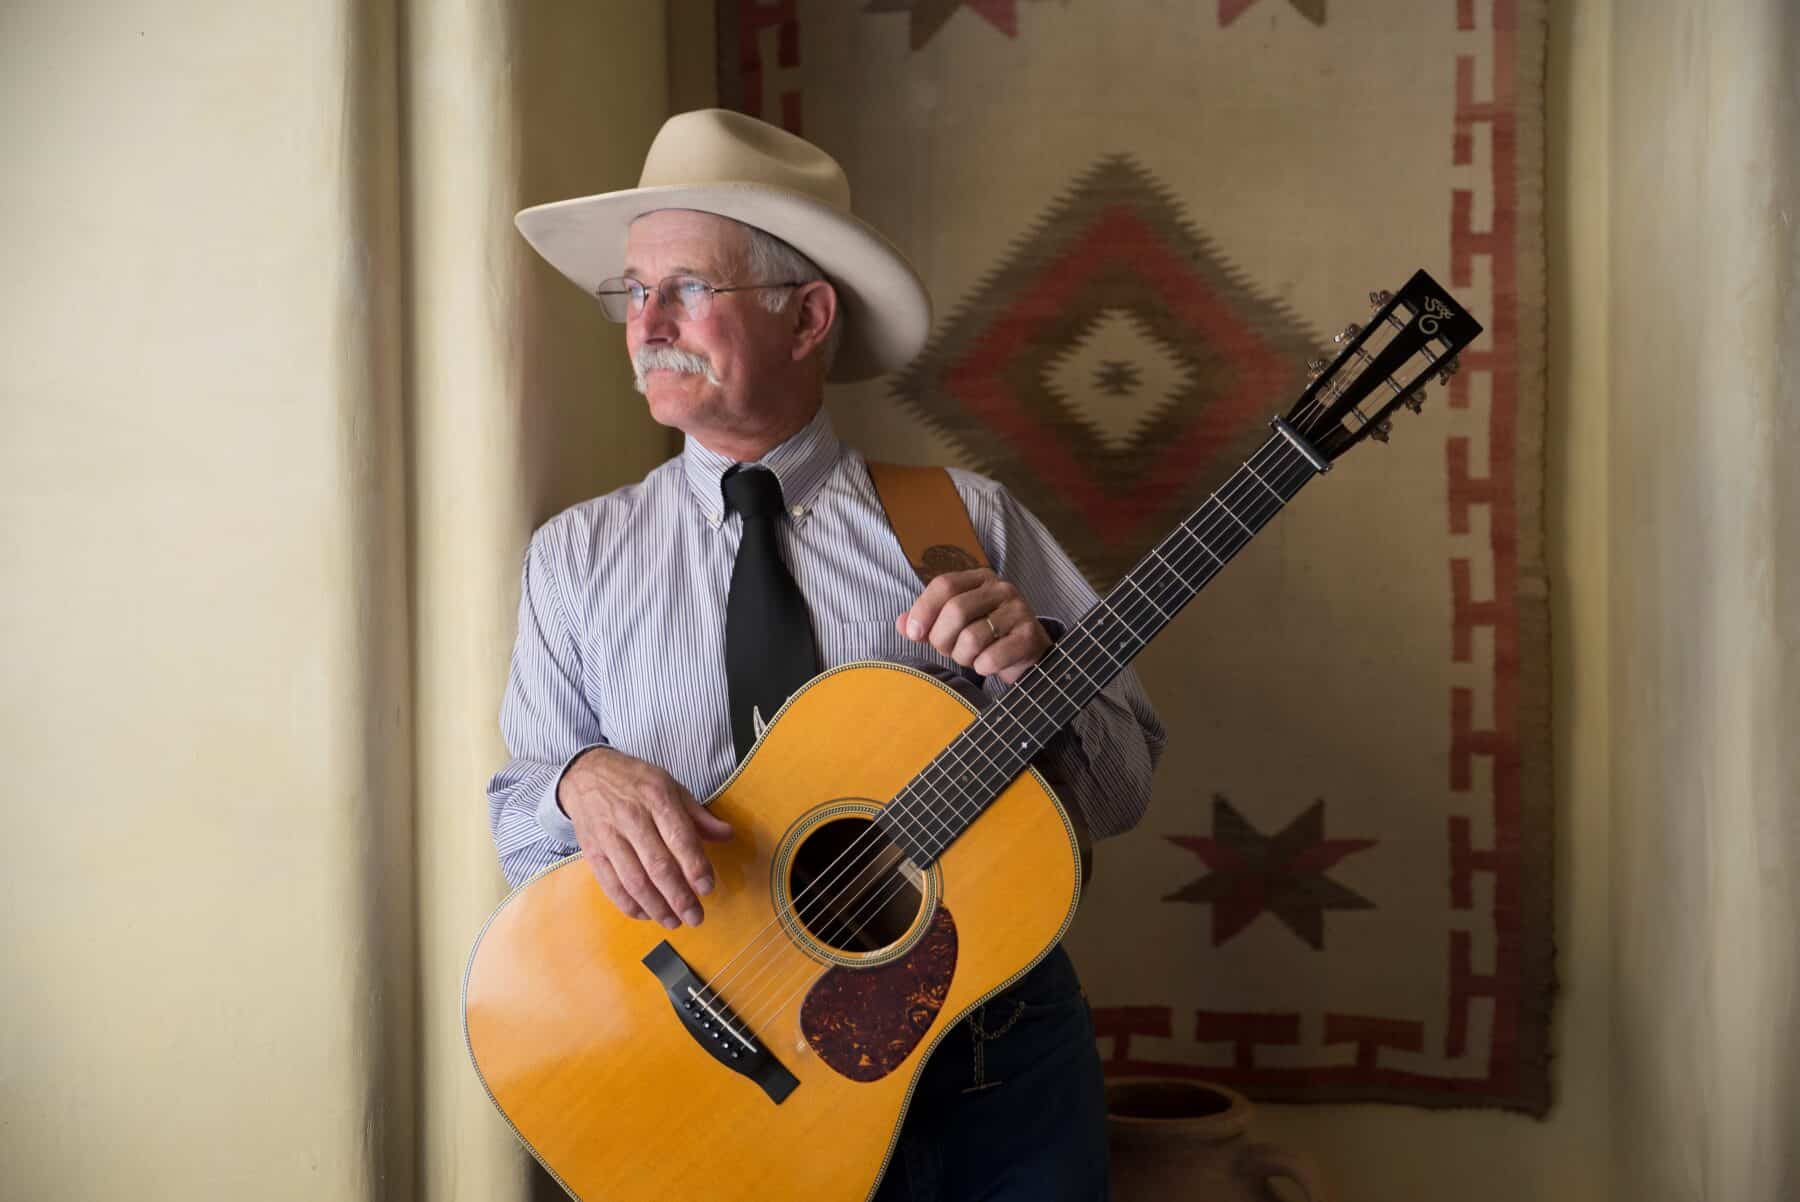 Dave Stamey is wearing a cowboy hat and holding a guitar as he leans against a wall in a Southwestern styled room